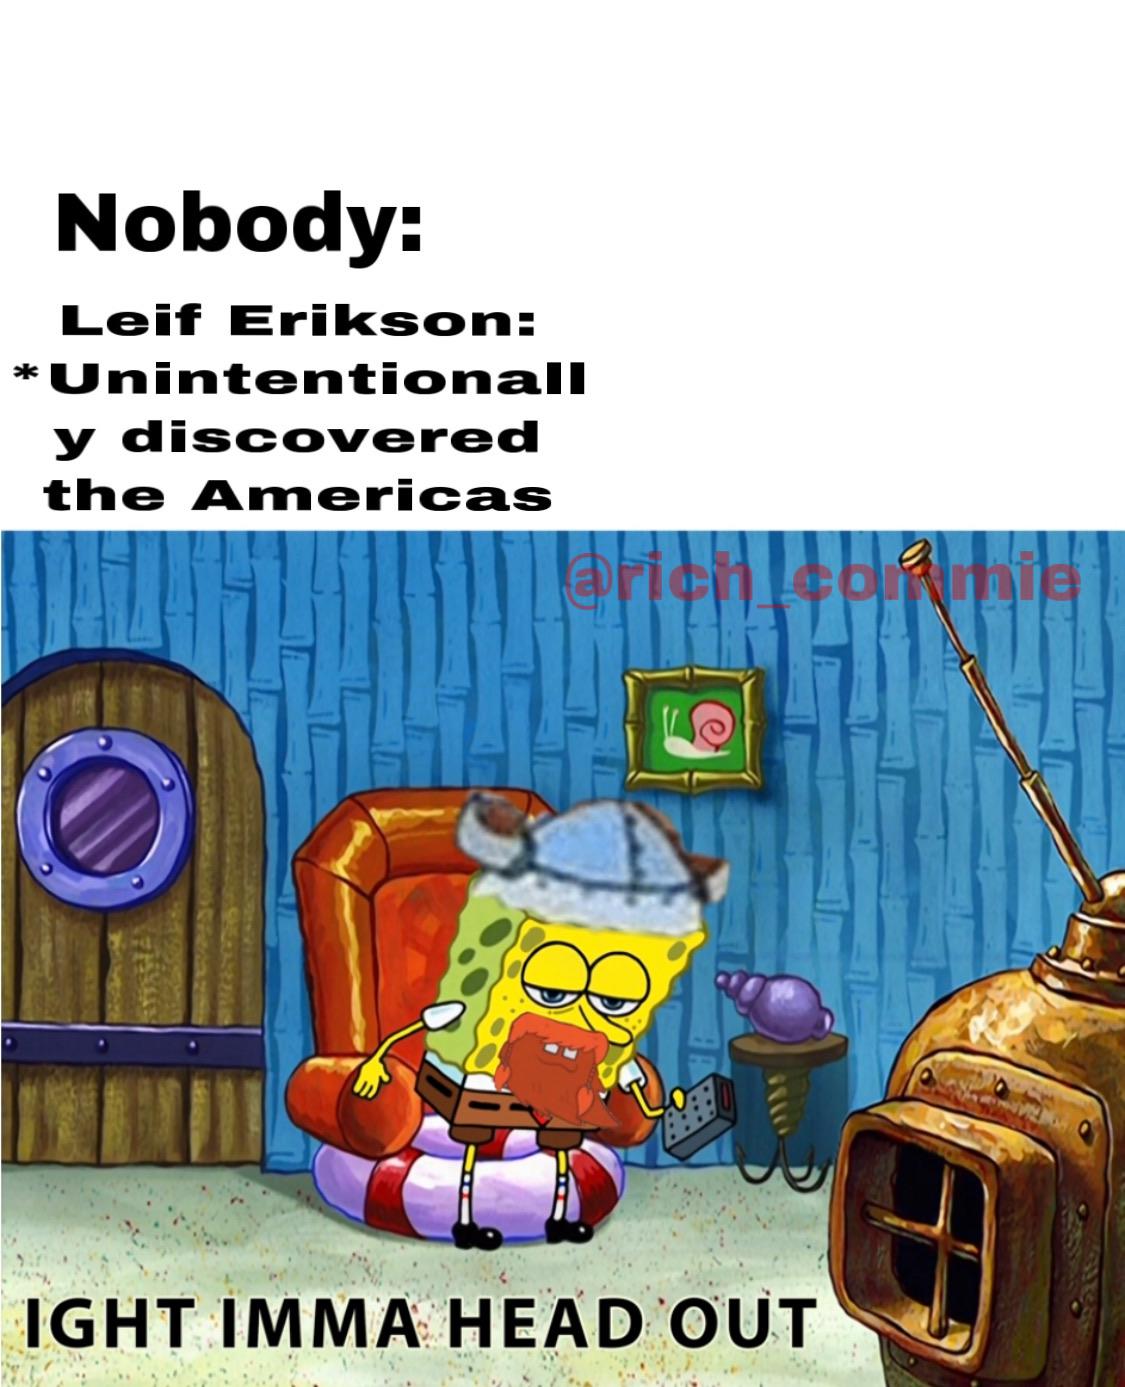 columbus day meme - ight imma head out memes - Nobody Leif Erikson Unintentionall y discovered the Americas Ight Imma Head Out